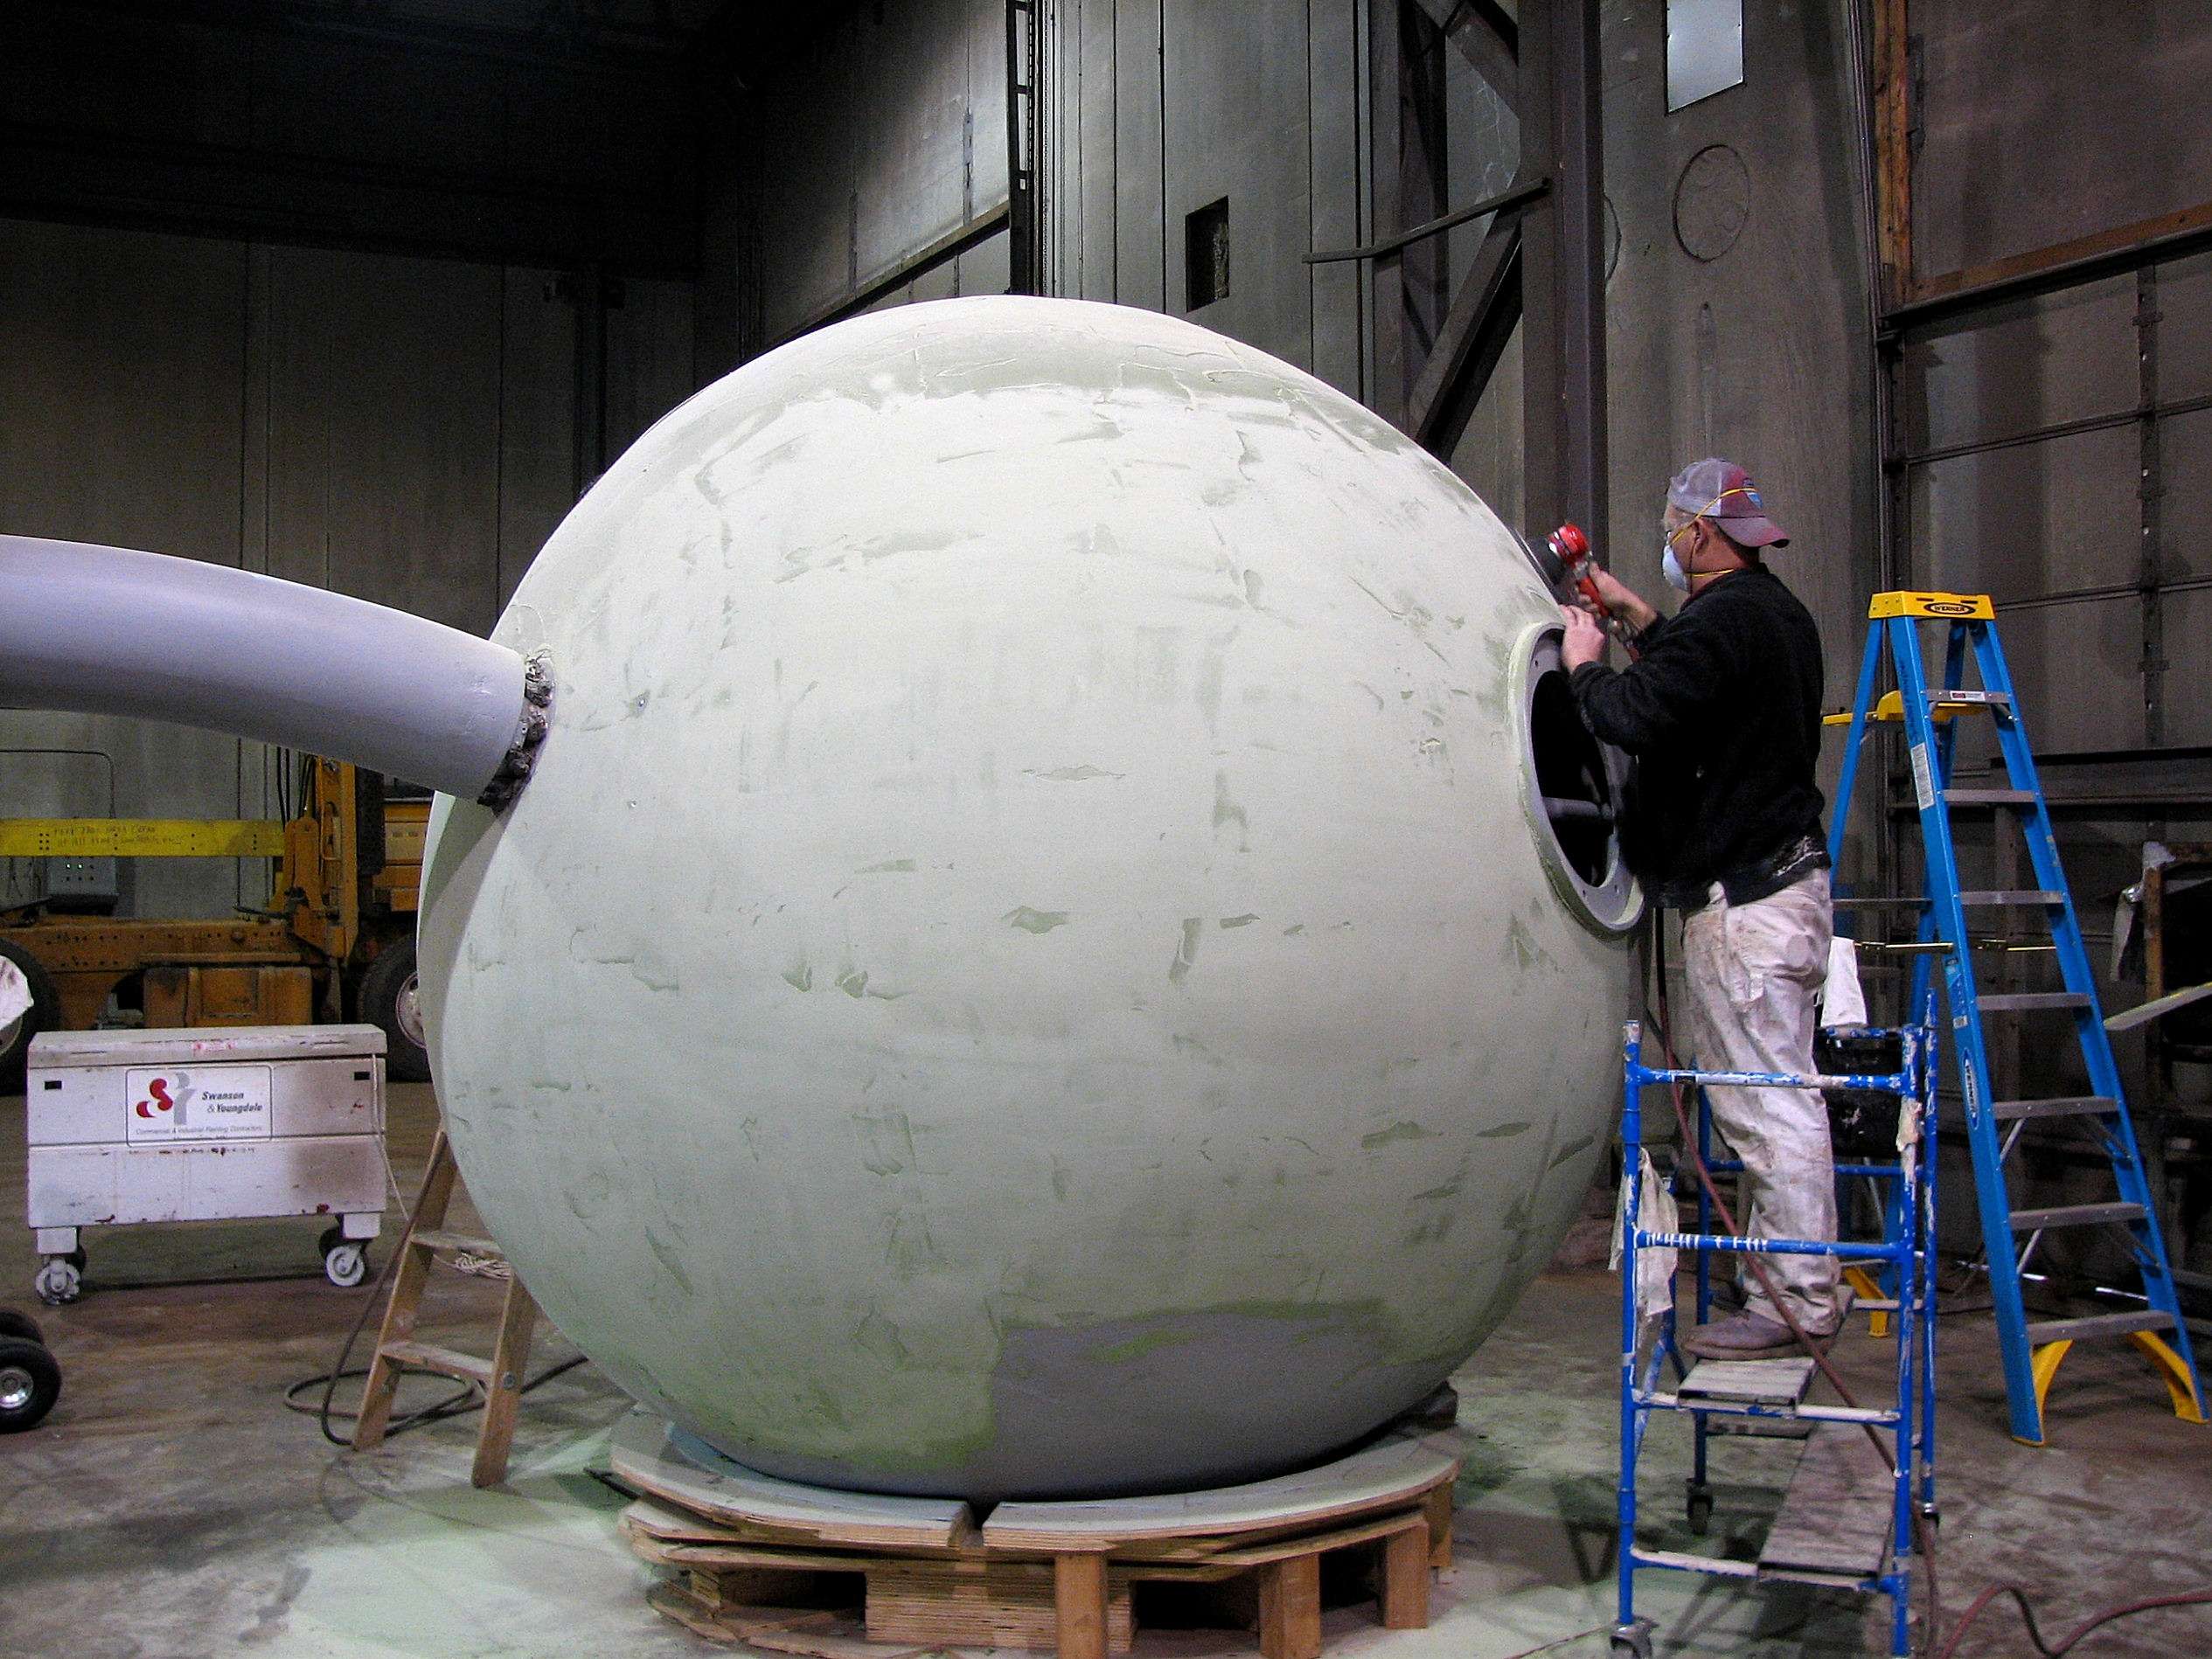 Figure 2: A worker applies and finishes the fairing compound. Once the first epoxy coats were applied, the process of reshaping the sculpture began. Several coats of fairing compound were used to recreate the original “cherry” shape.